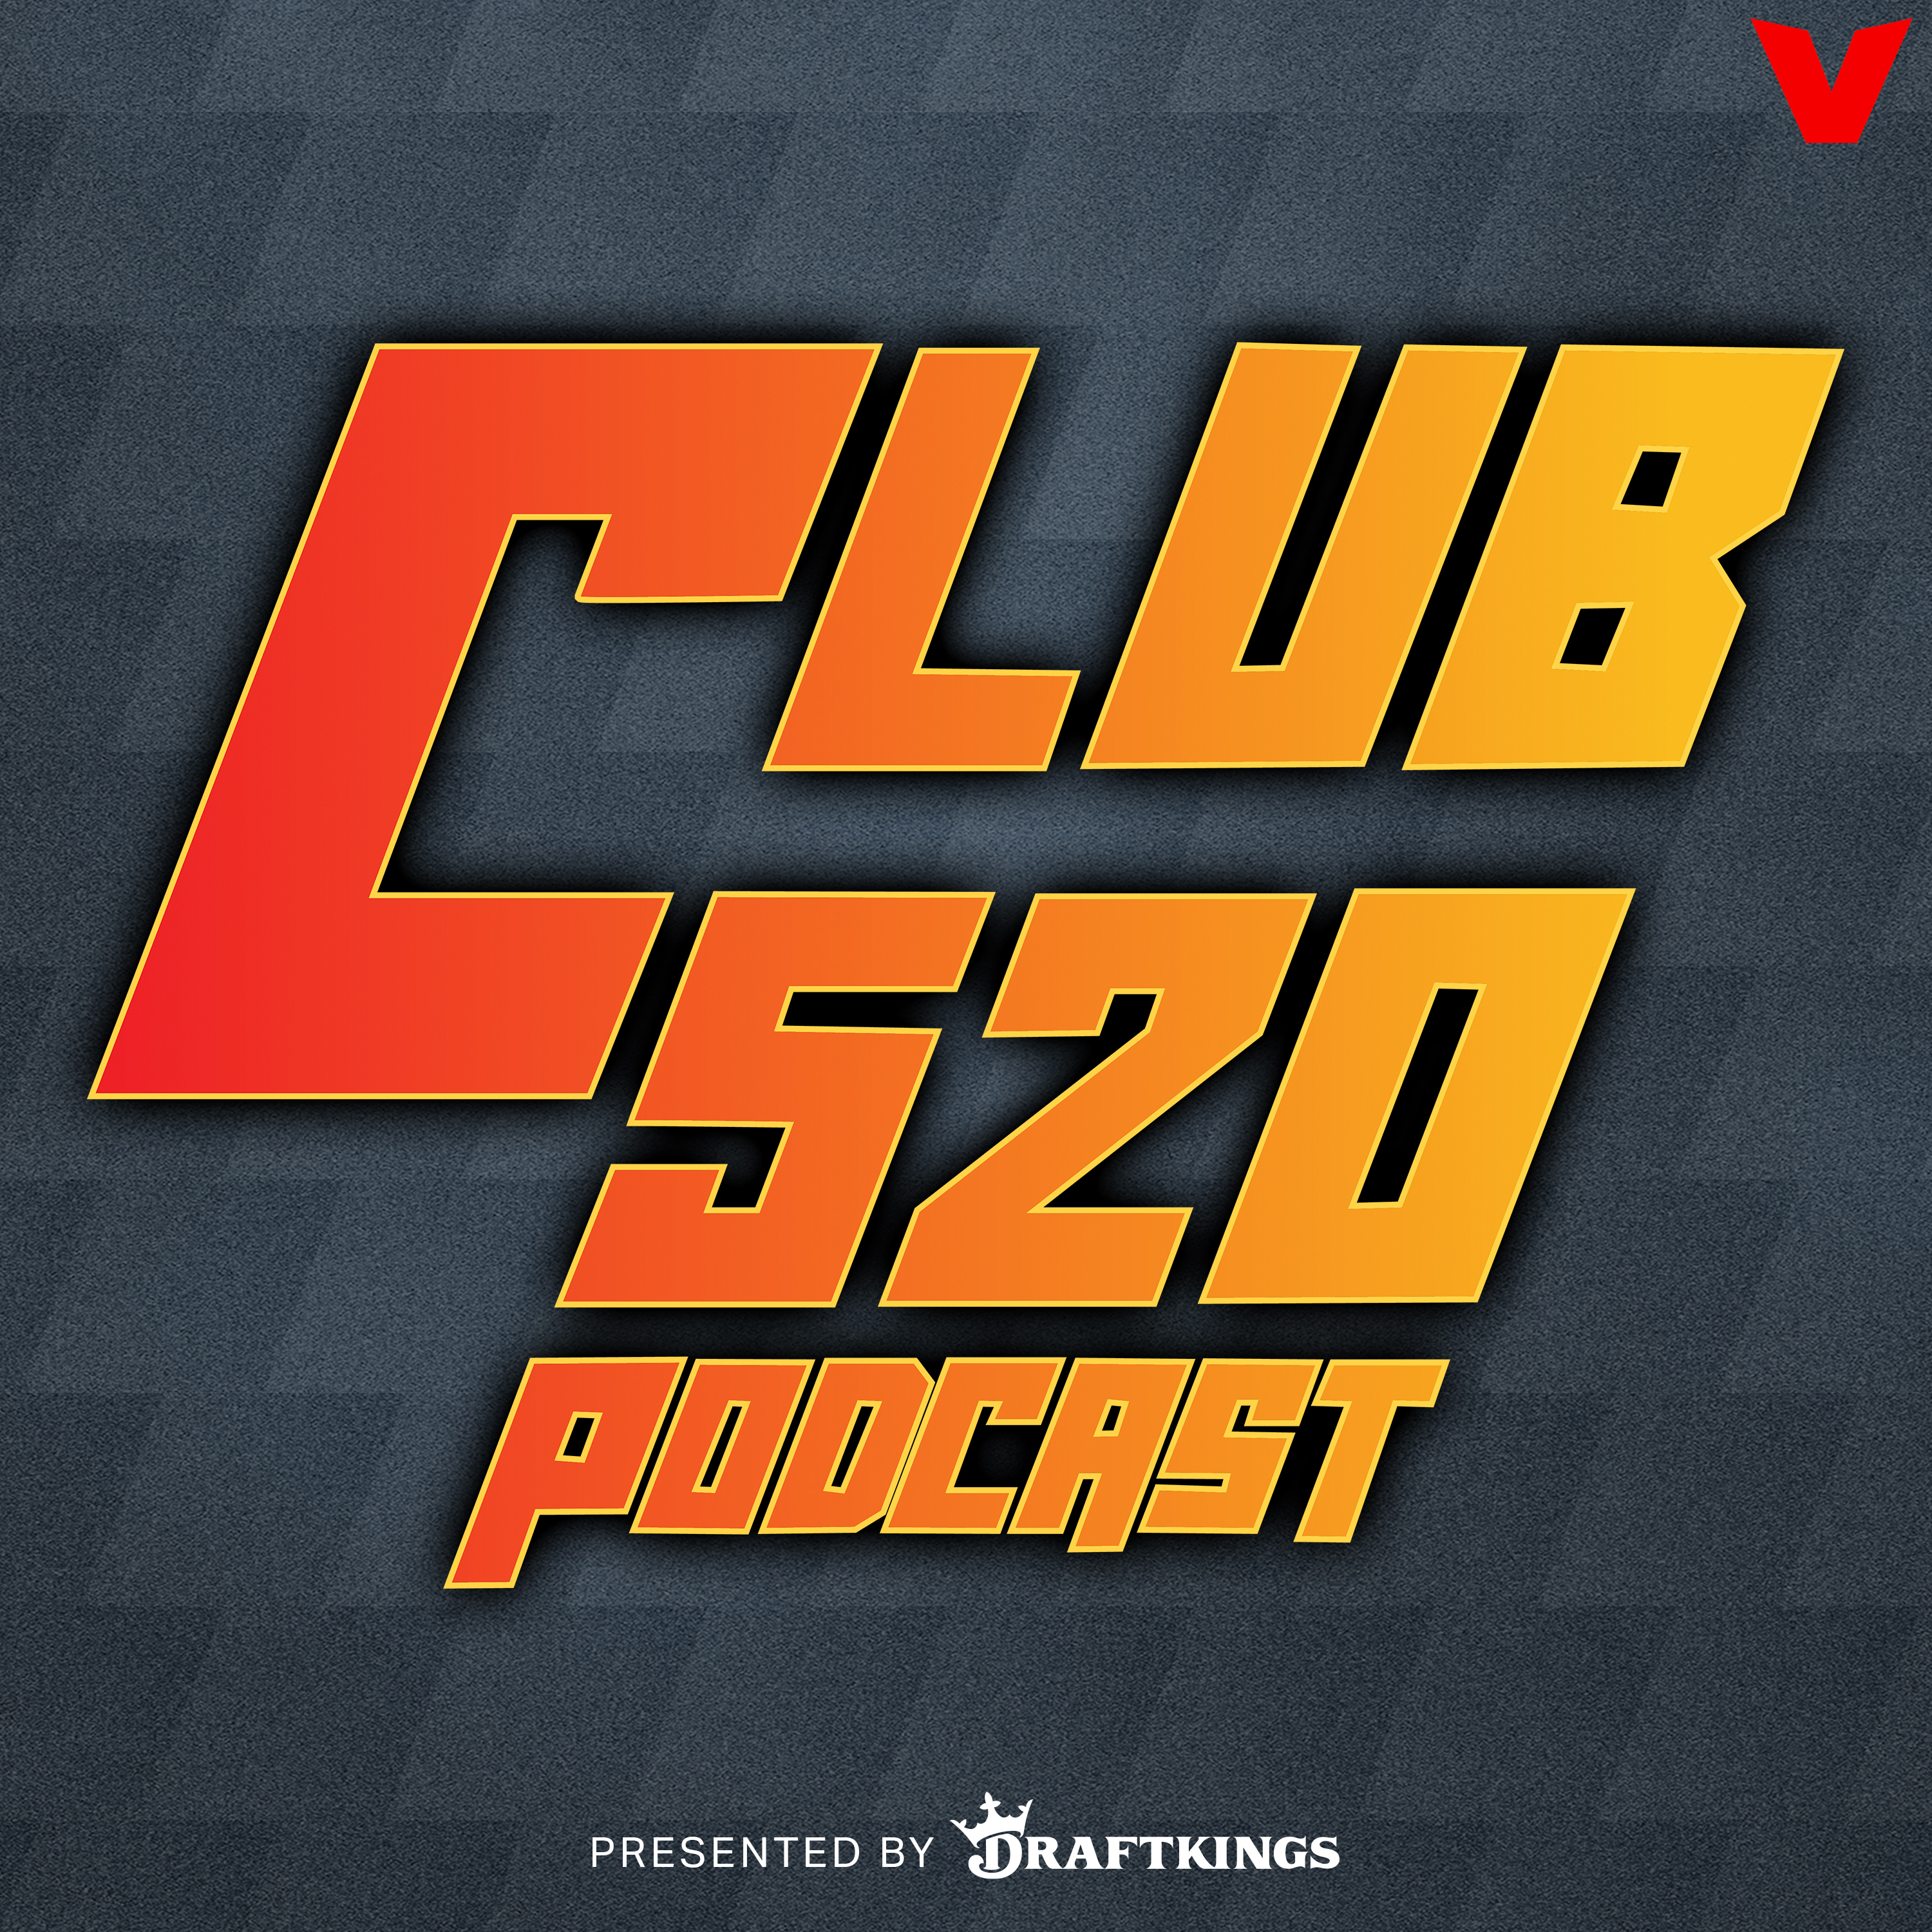 Club 520 x Hennessy - Arike Ogunbowale and Jeff Teague on Curry vs. Ionescu + top 5 hoopers ALL TIME